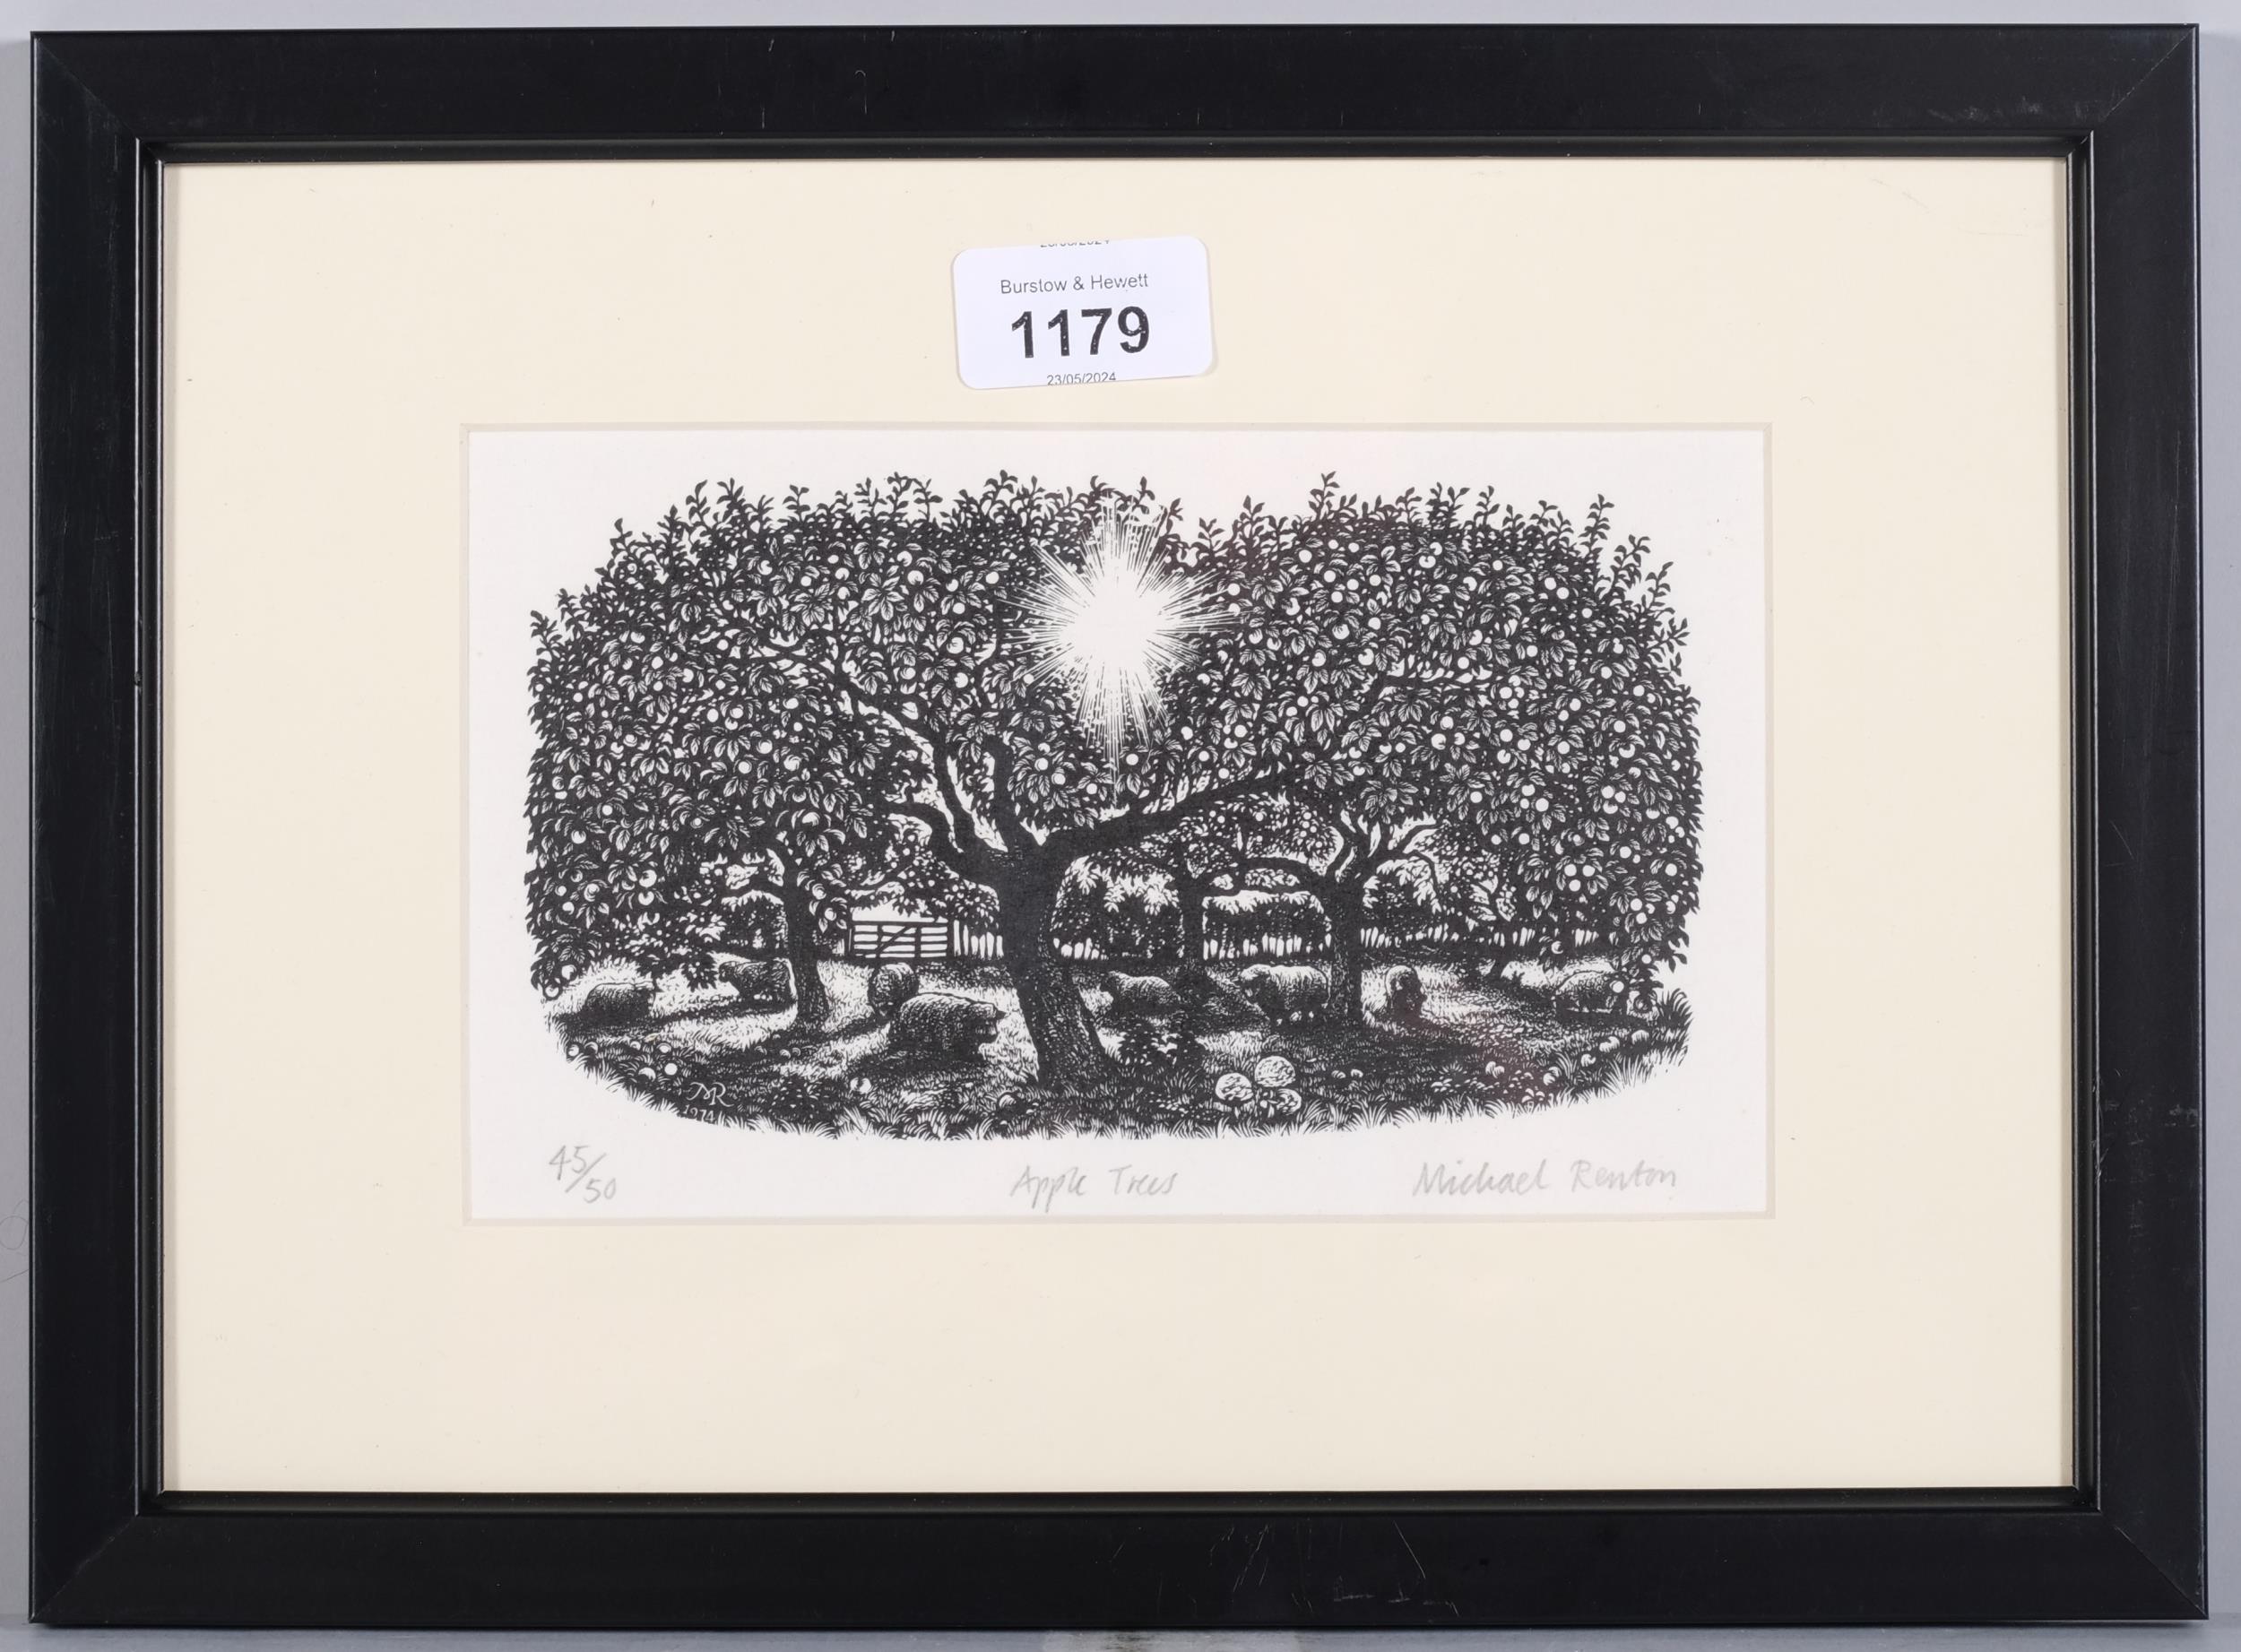 Michael Renton (1934-2001), limited edition wood engraving on paper, Apple Trees, 11cm x 18cm, - Image 2 of 4